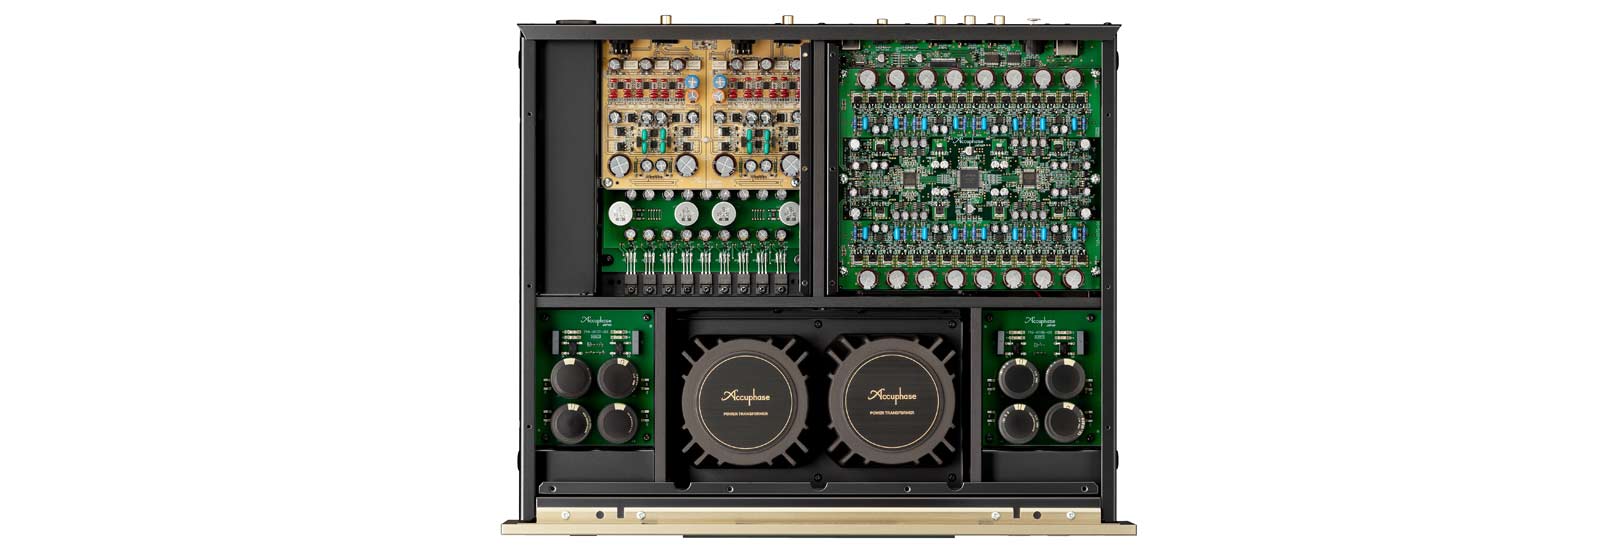 Accuphase-DC1000-top